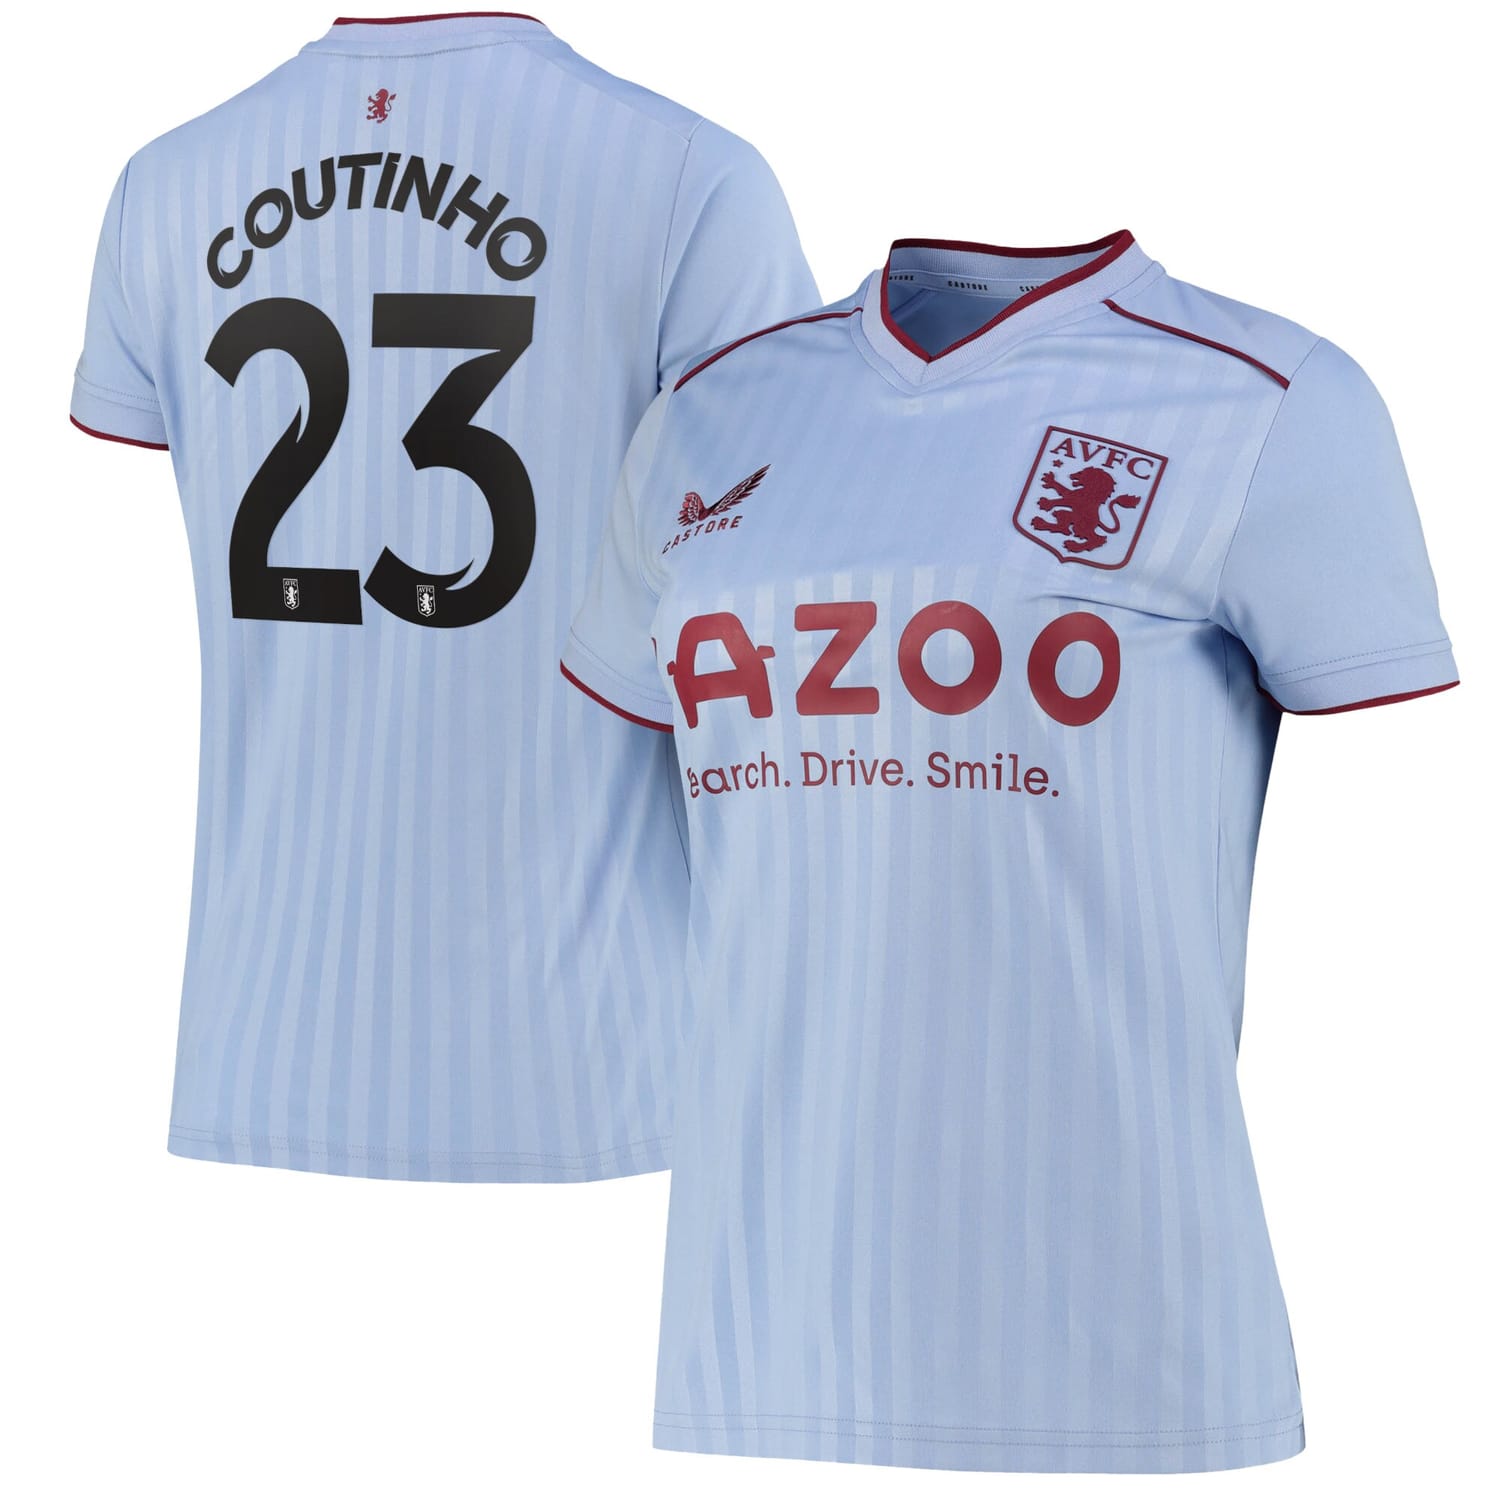 Premier League Aston Villa Away Cup Jersey Shirt 2022-23 player Philippe Coutinho 23 printing for Women